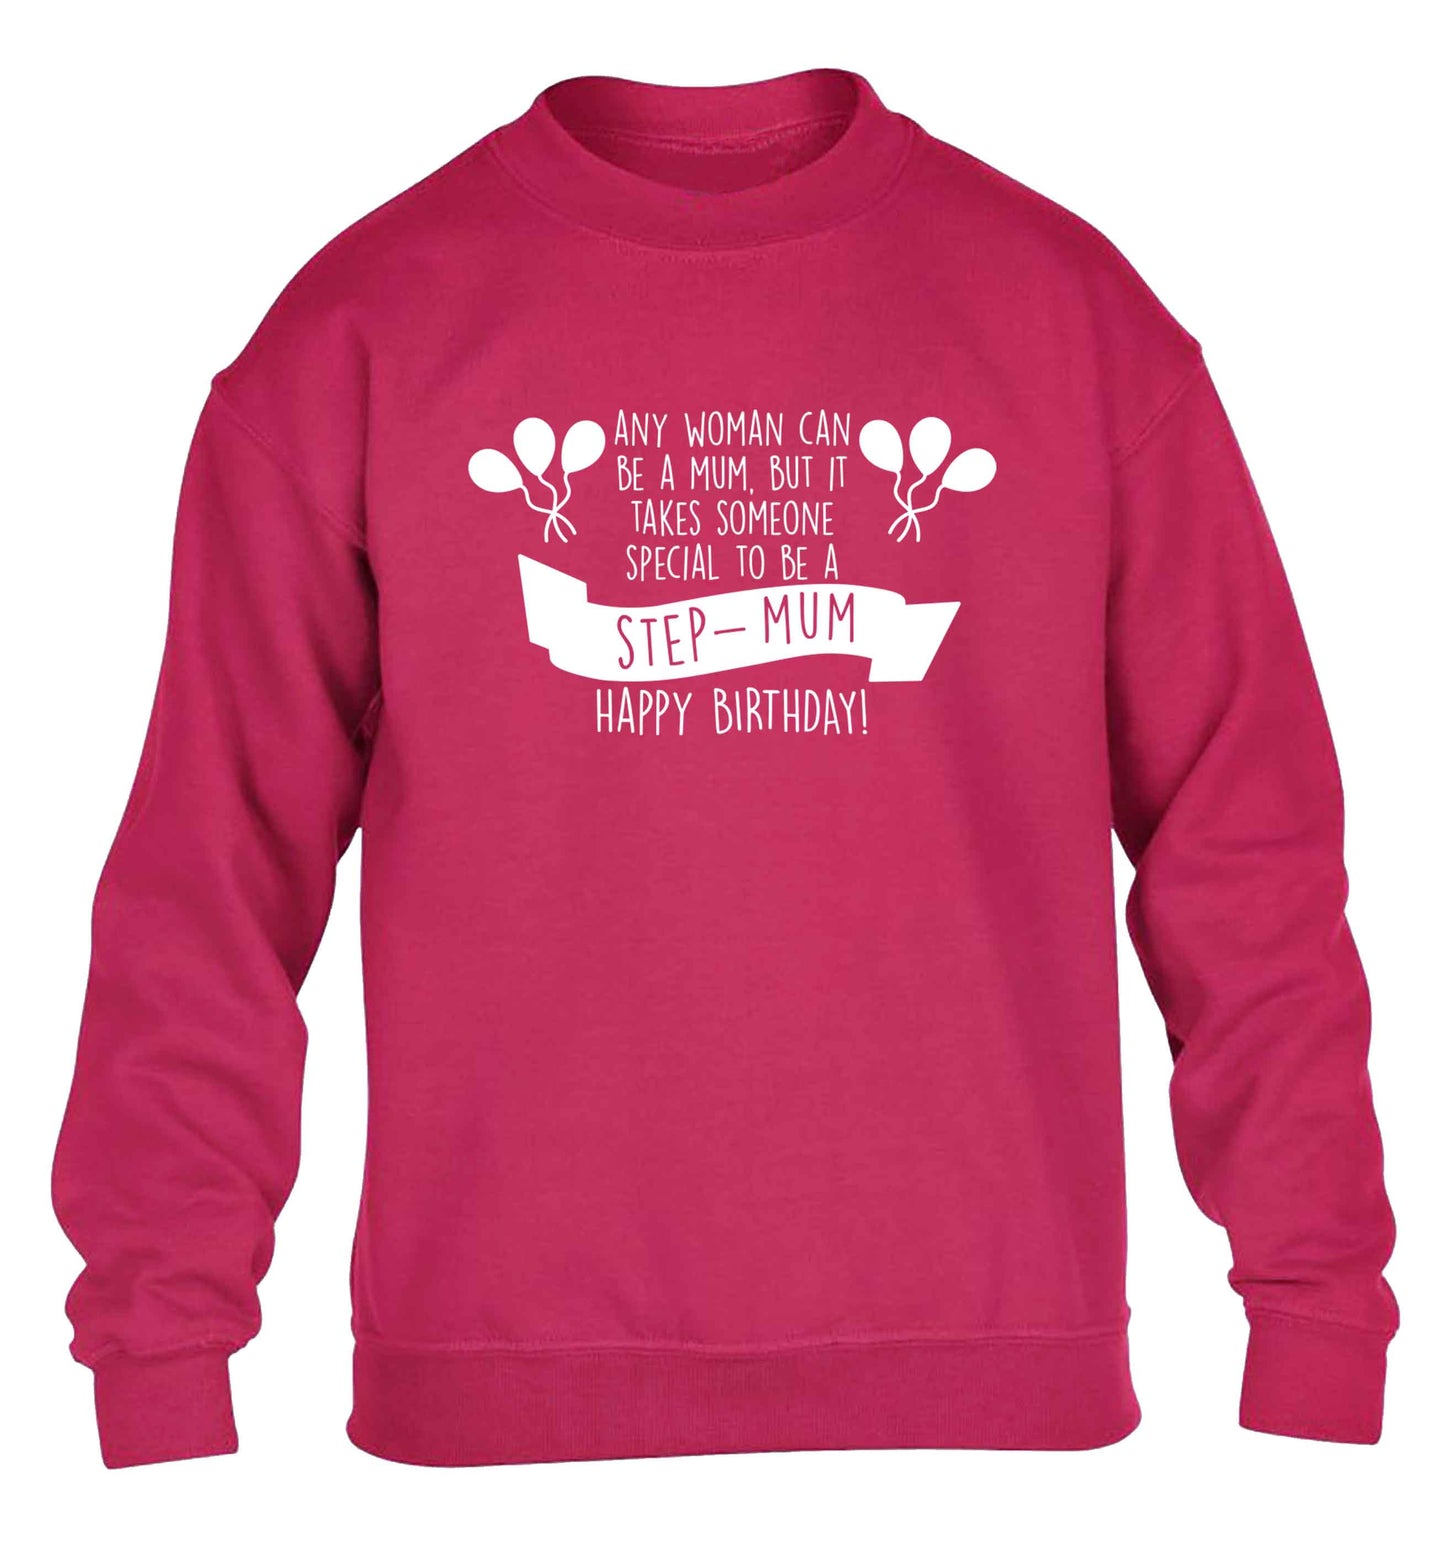 Takes someone special to be a step-mum, happy birthday! children's pink sweater 12-13 Years